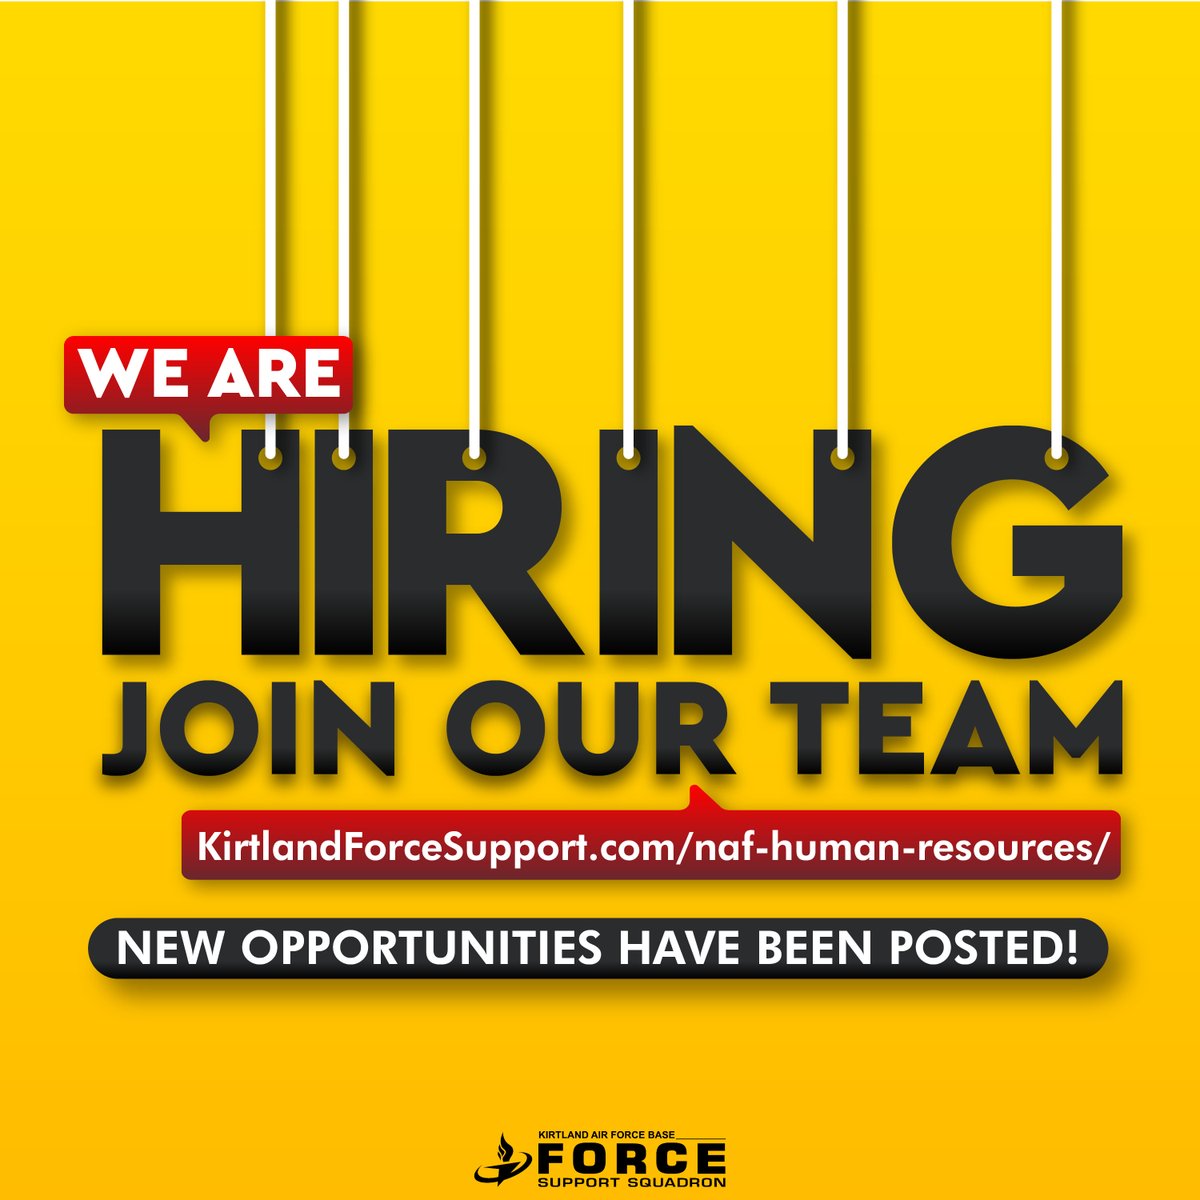 Hey, #TeamKirtland! Want to join our team?
We are currently looking for a Recreation Aid and two Child and Youth Program Assistants.

To see the details and listings 👉kirtlandforcesupport.com/naf-human-reso…

#377FSS #KirtlandAFB #JobOppurtunities #KirtlandForceSupport